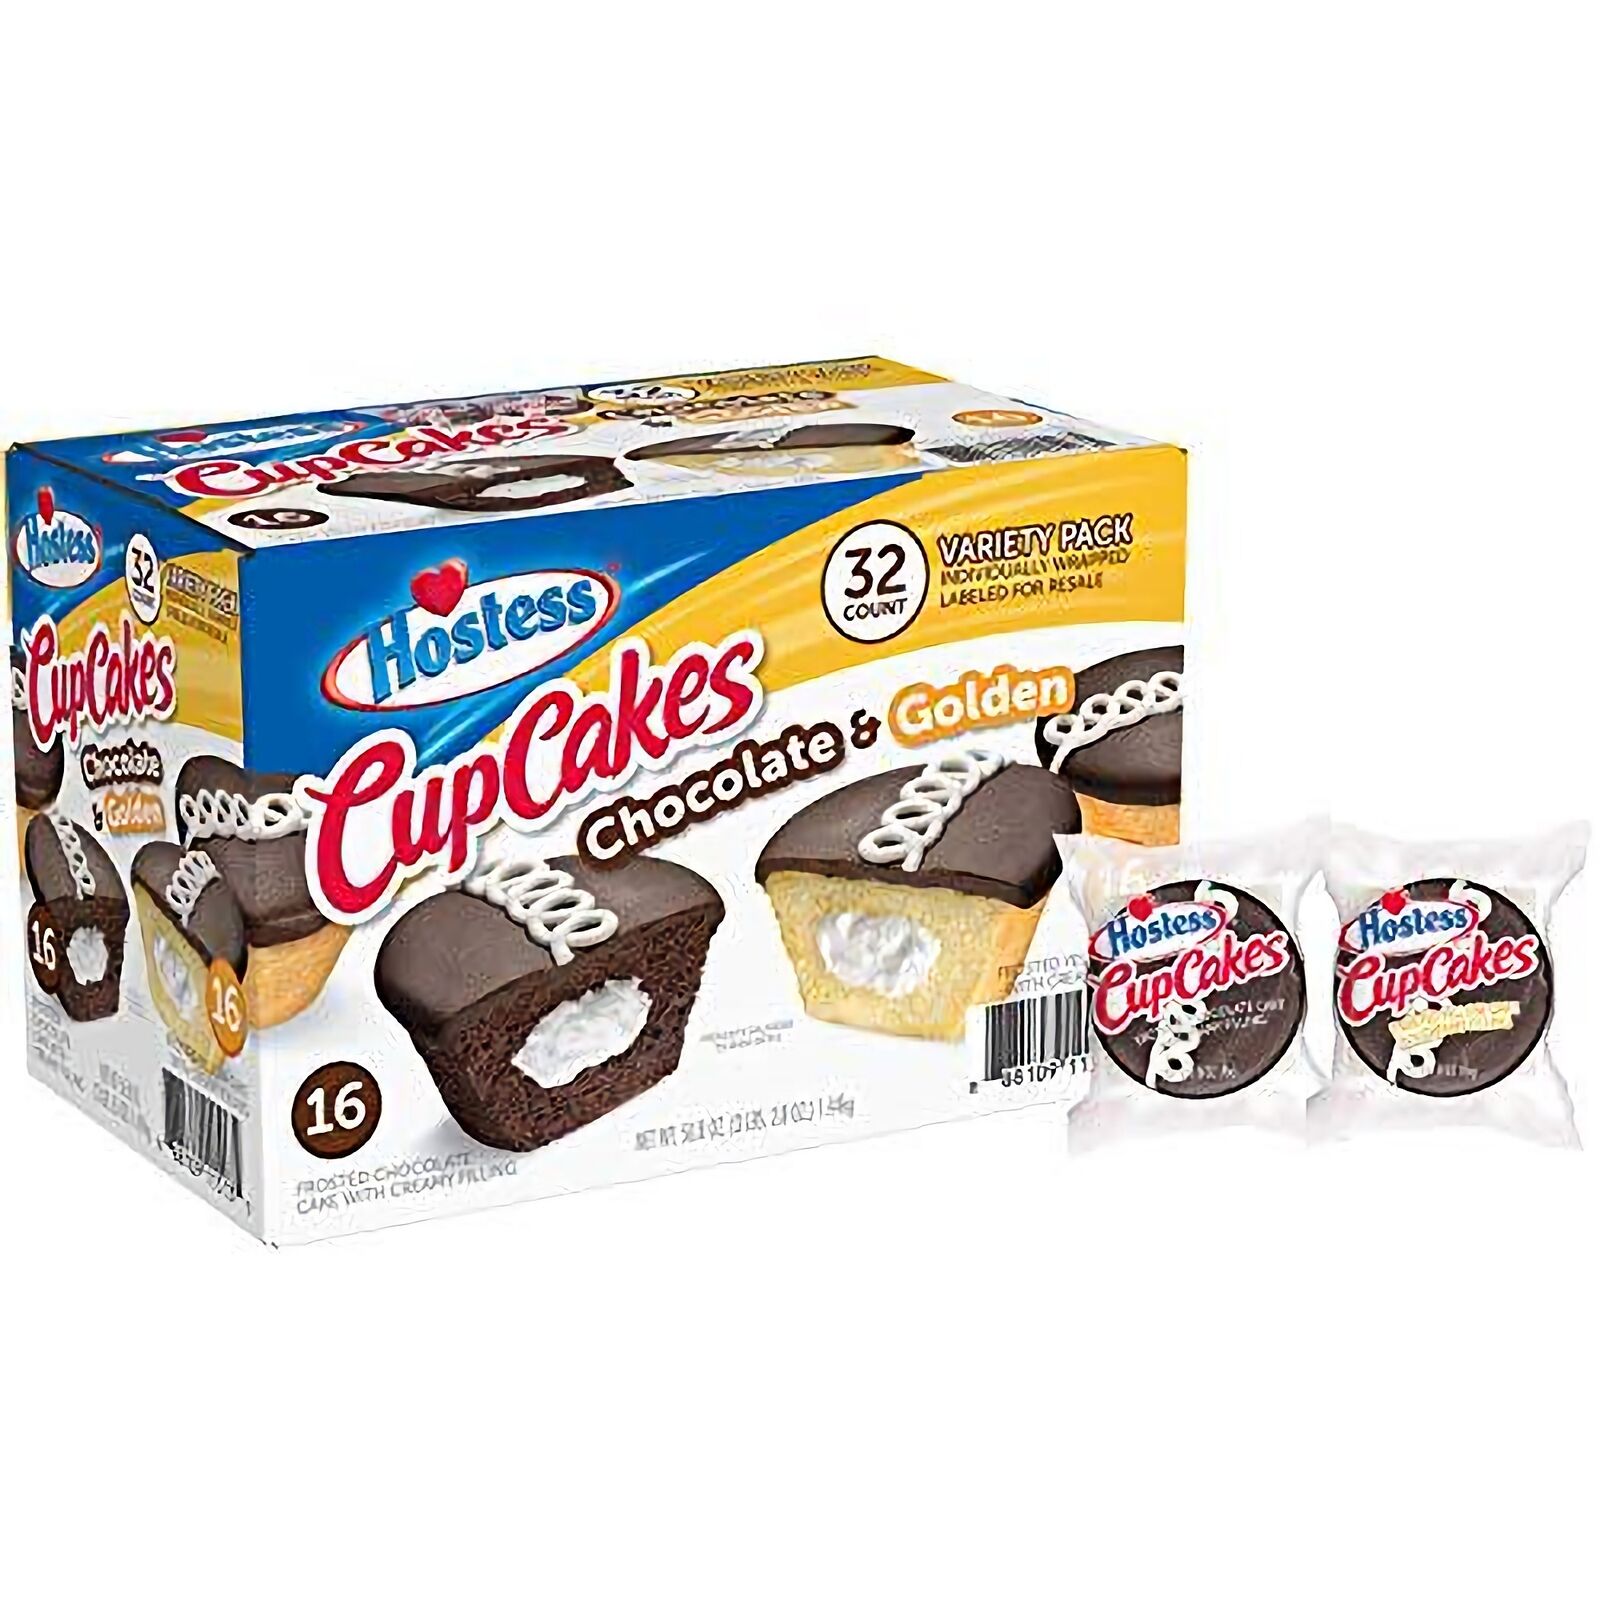 Hostess Chocolate Cupcakes & Golden Cupcakes Variety Pack (32 Ct.)